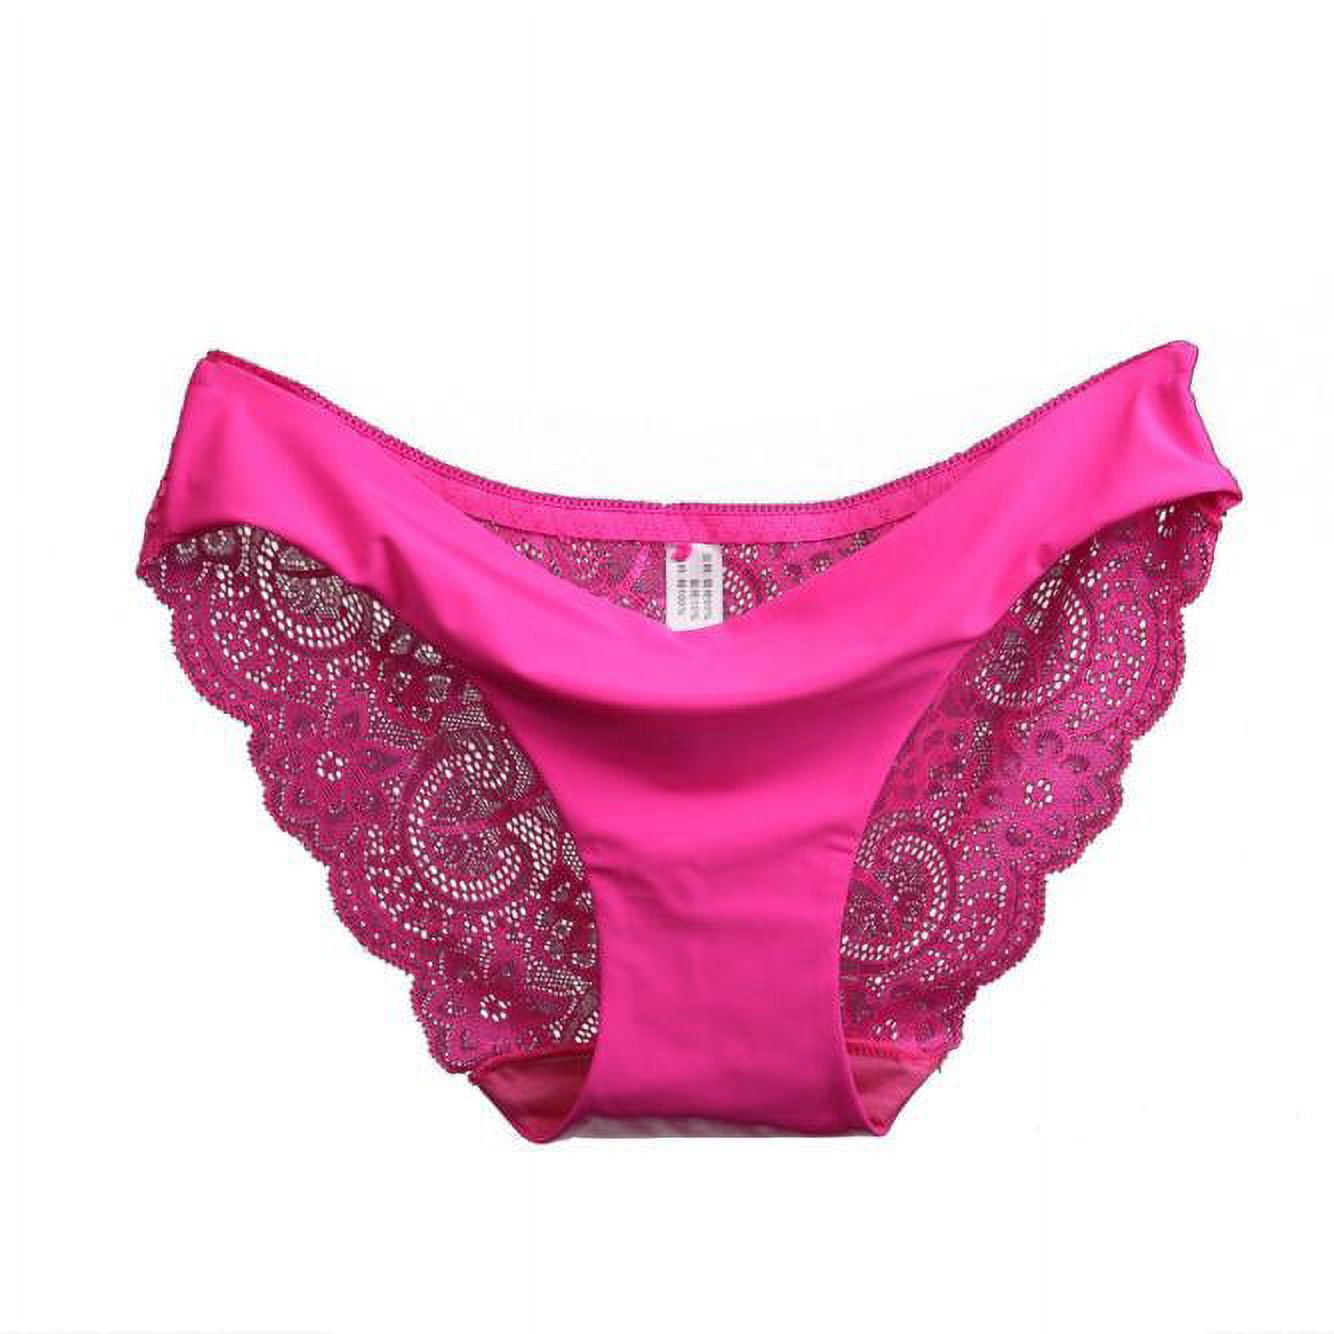 New Years Lingerie Push up Women lace Panties Seamless Cotton